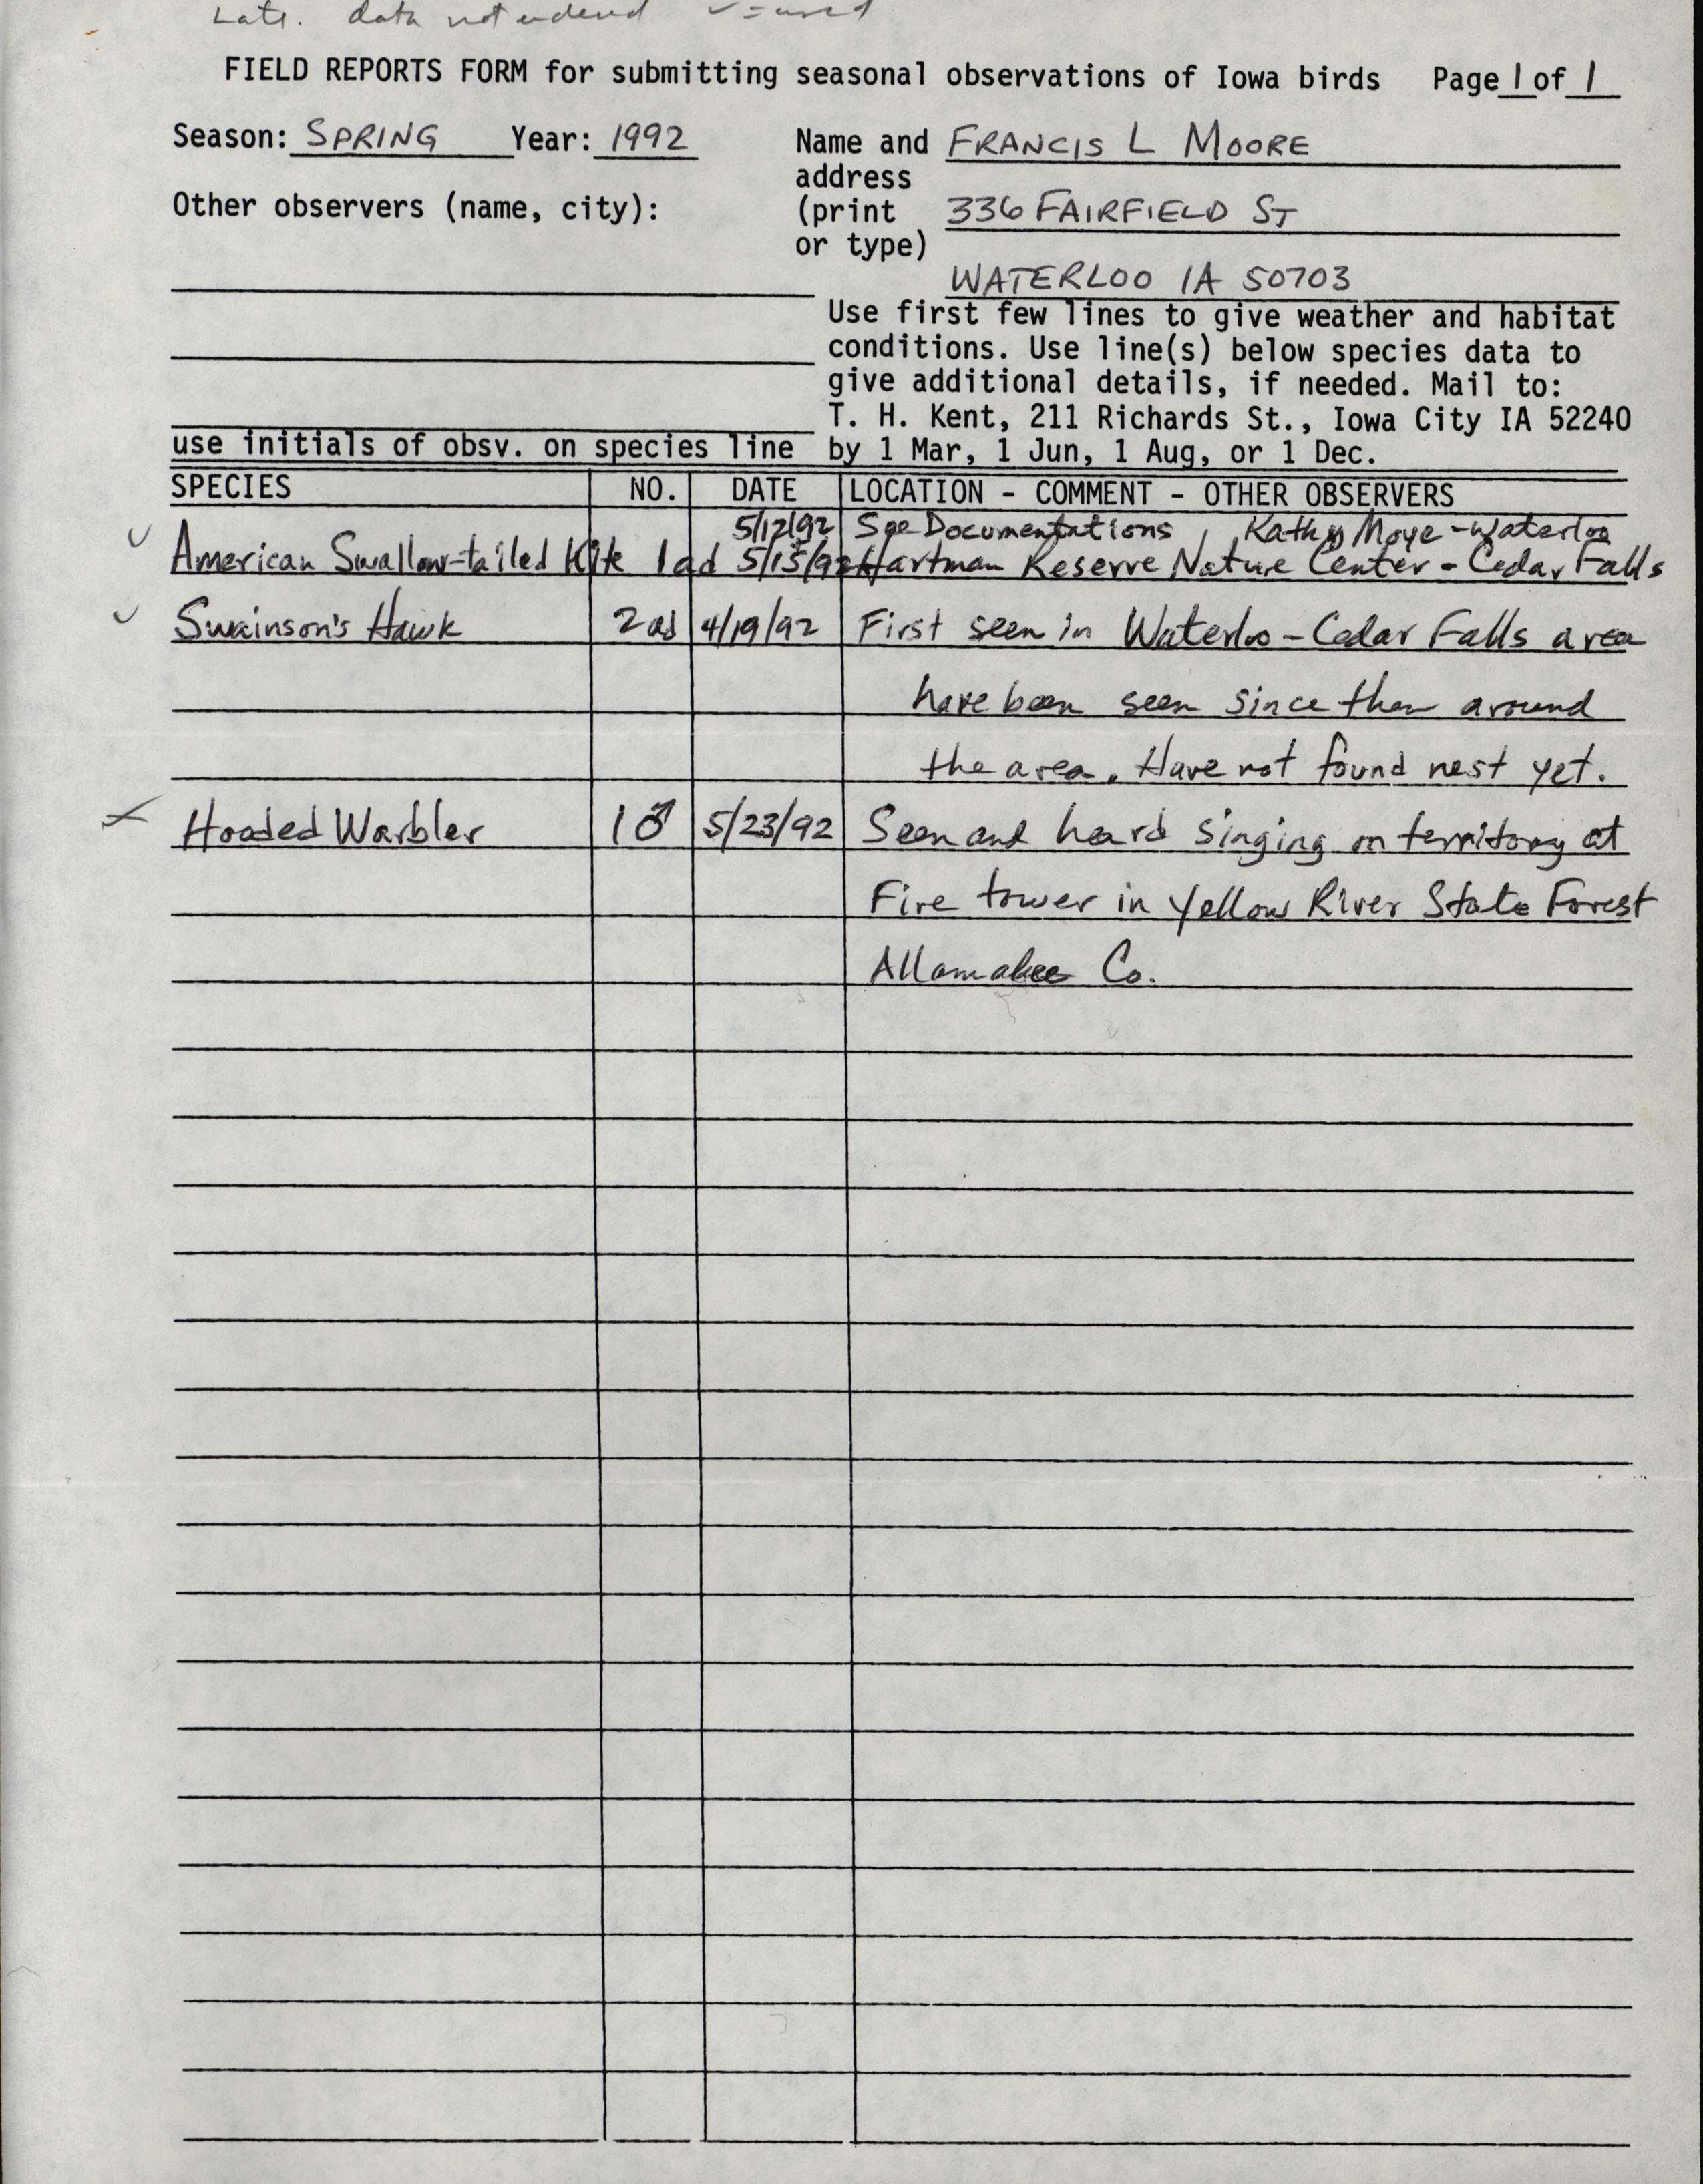 Field reports form for submitting seasonal observations of Iowa birds, Francis L. Moore, spring 1992